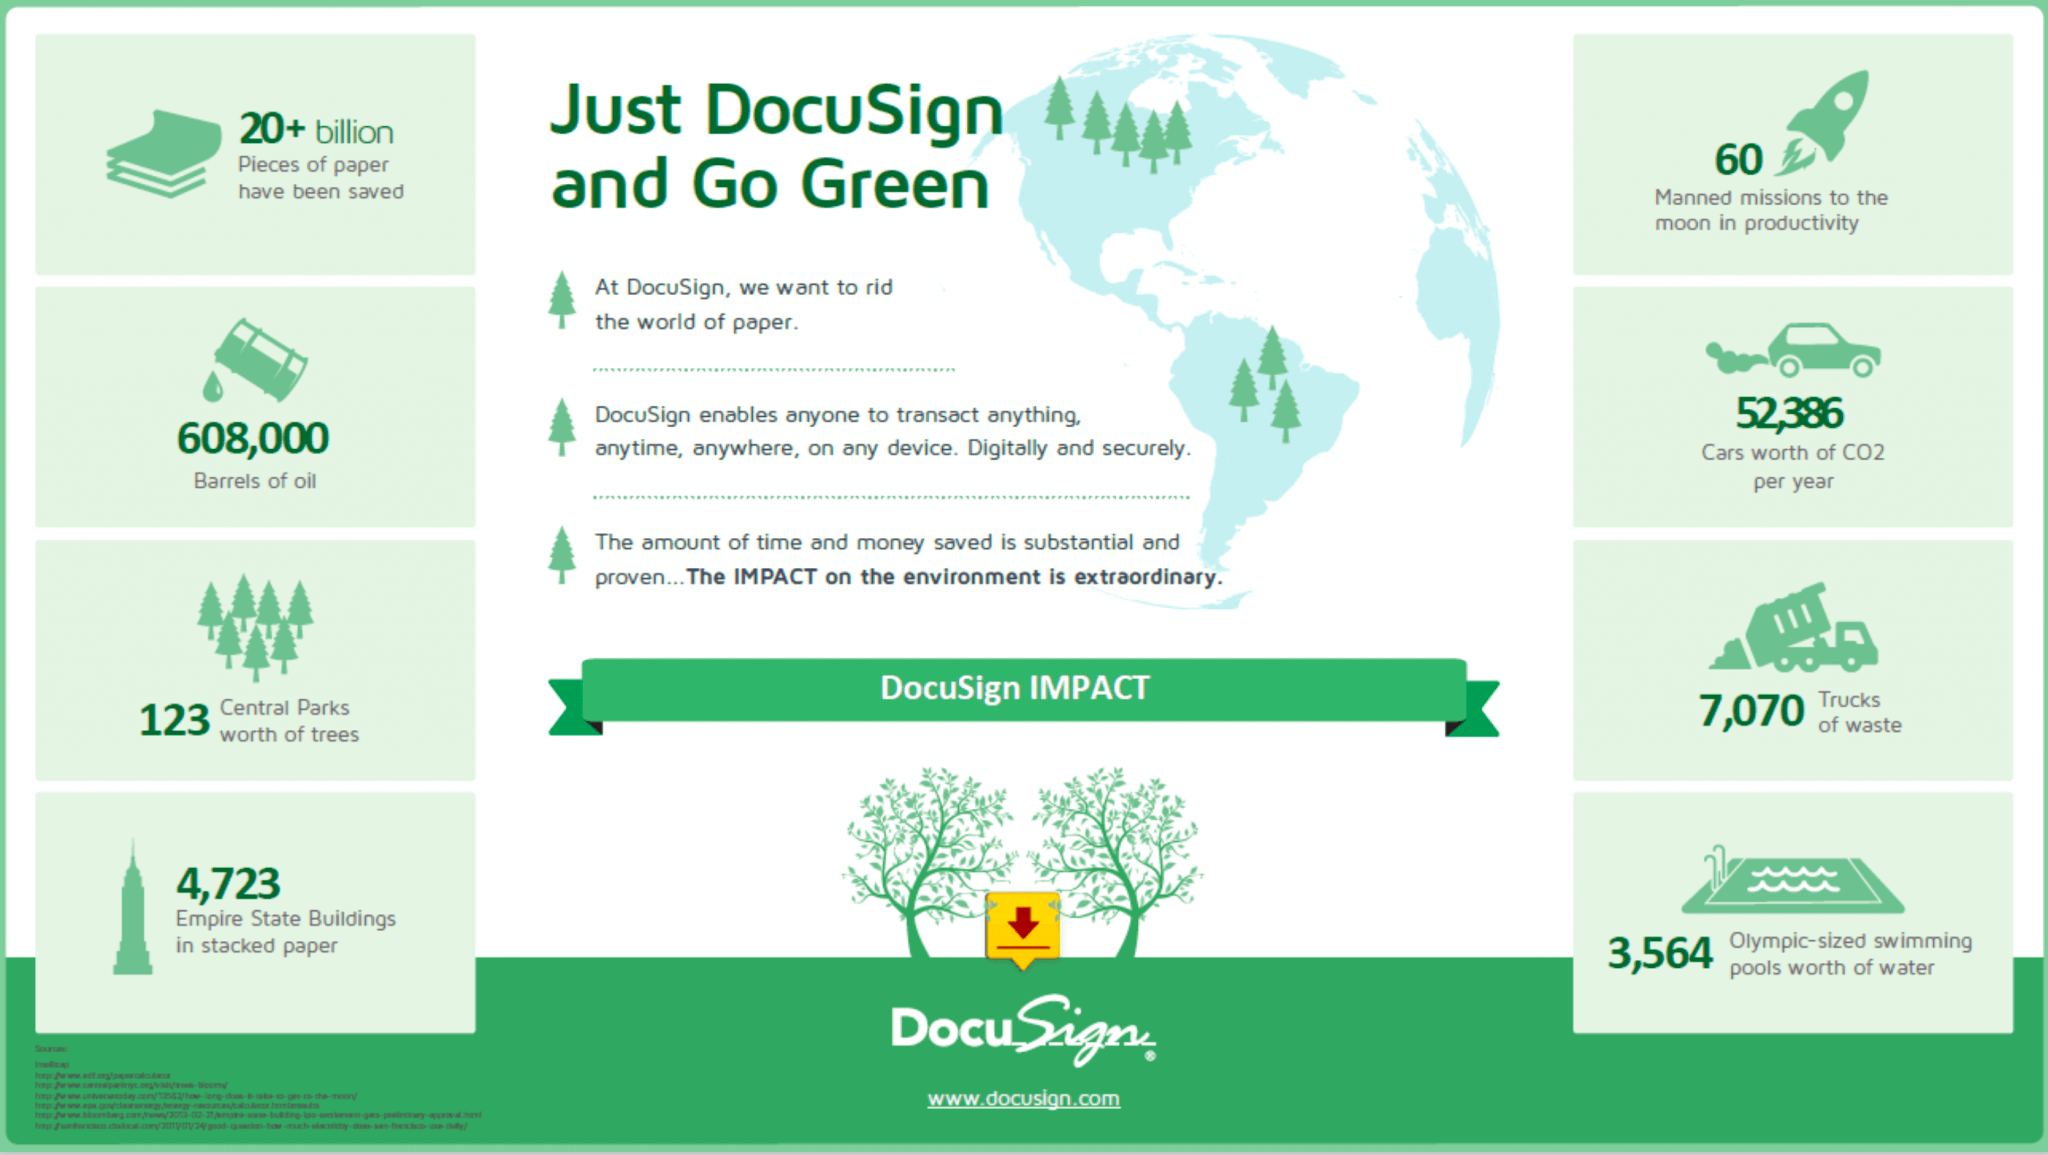 DocuSign and Go Green